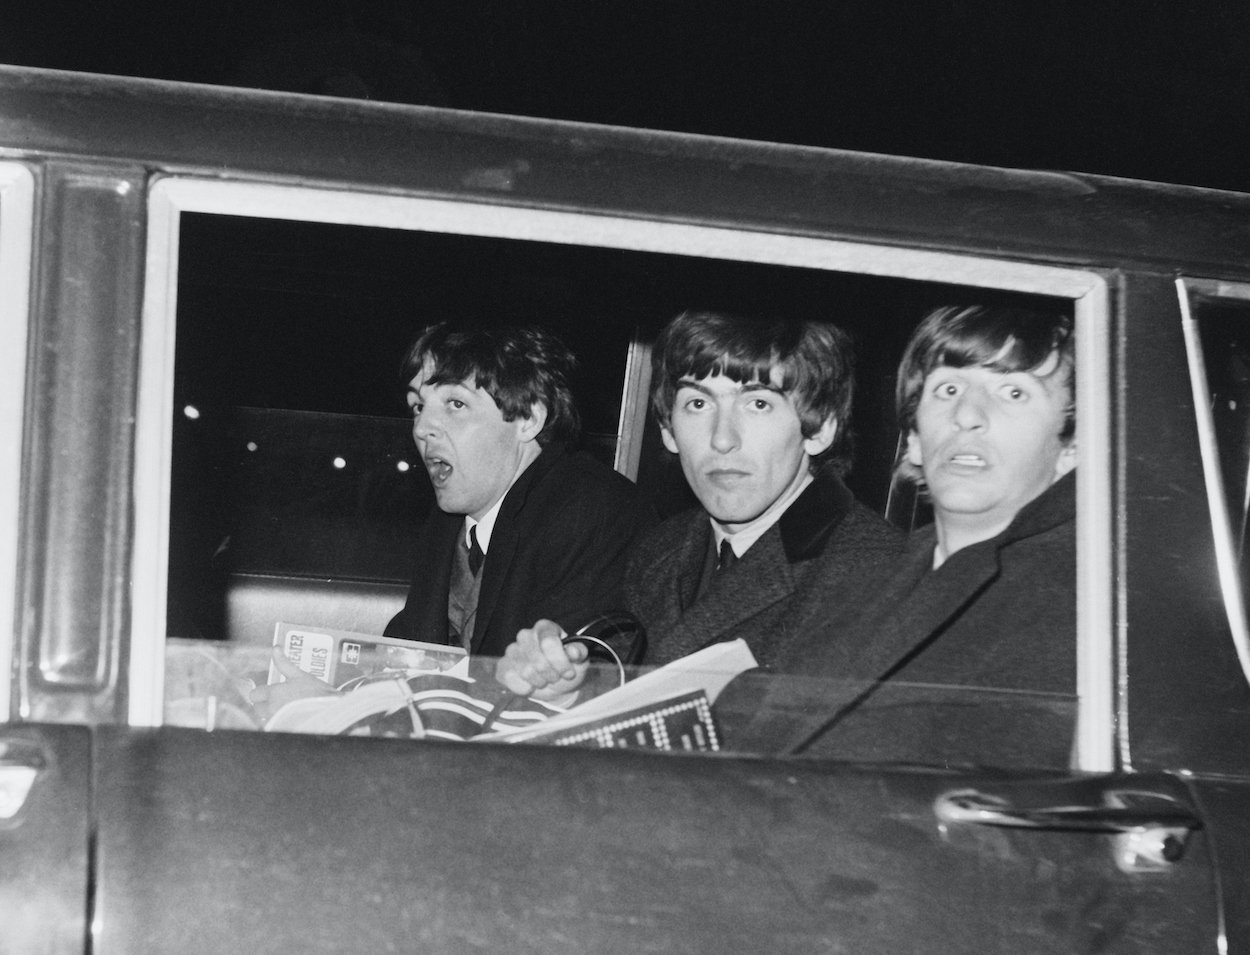 (l-r) Paul McCartney, George Harrison, and Ringo Starr at JFK Airport in 1964, two years after Ringo said Paul and George argued for two hours over car keys.